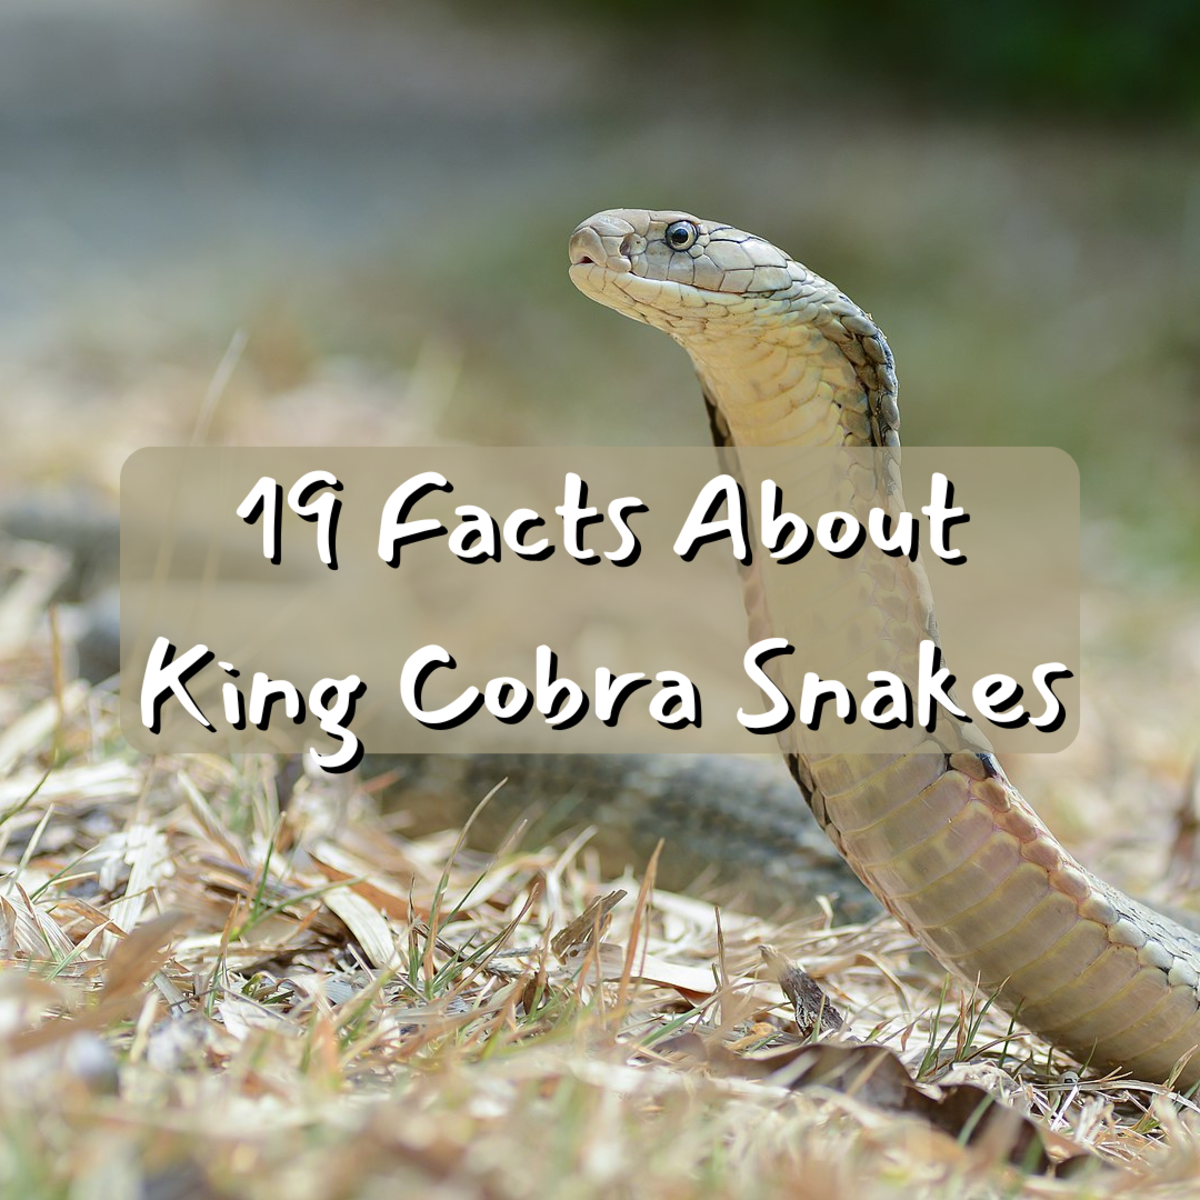 Read on to learn 19 incredible facts about the infamous King Cobra snake.